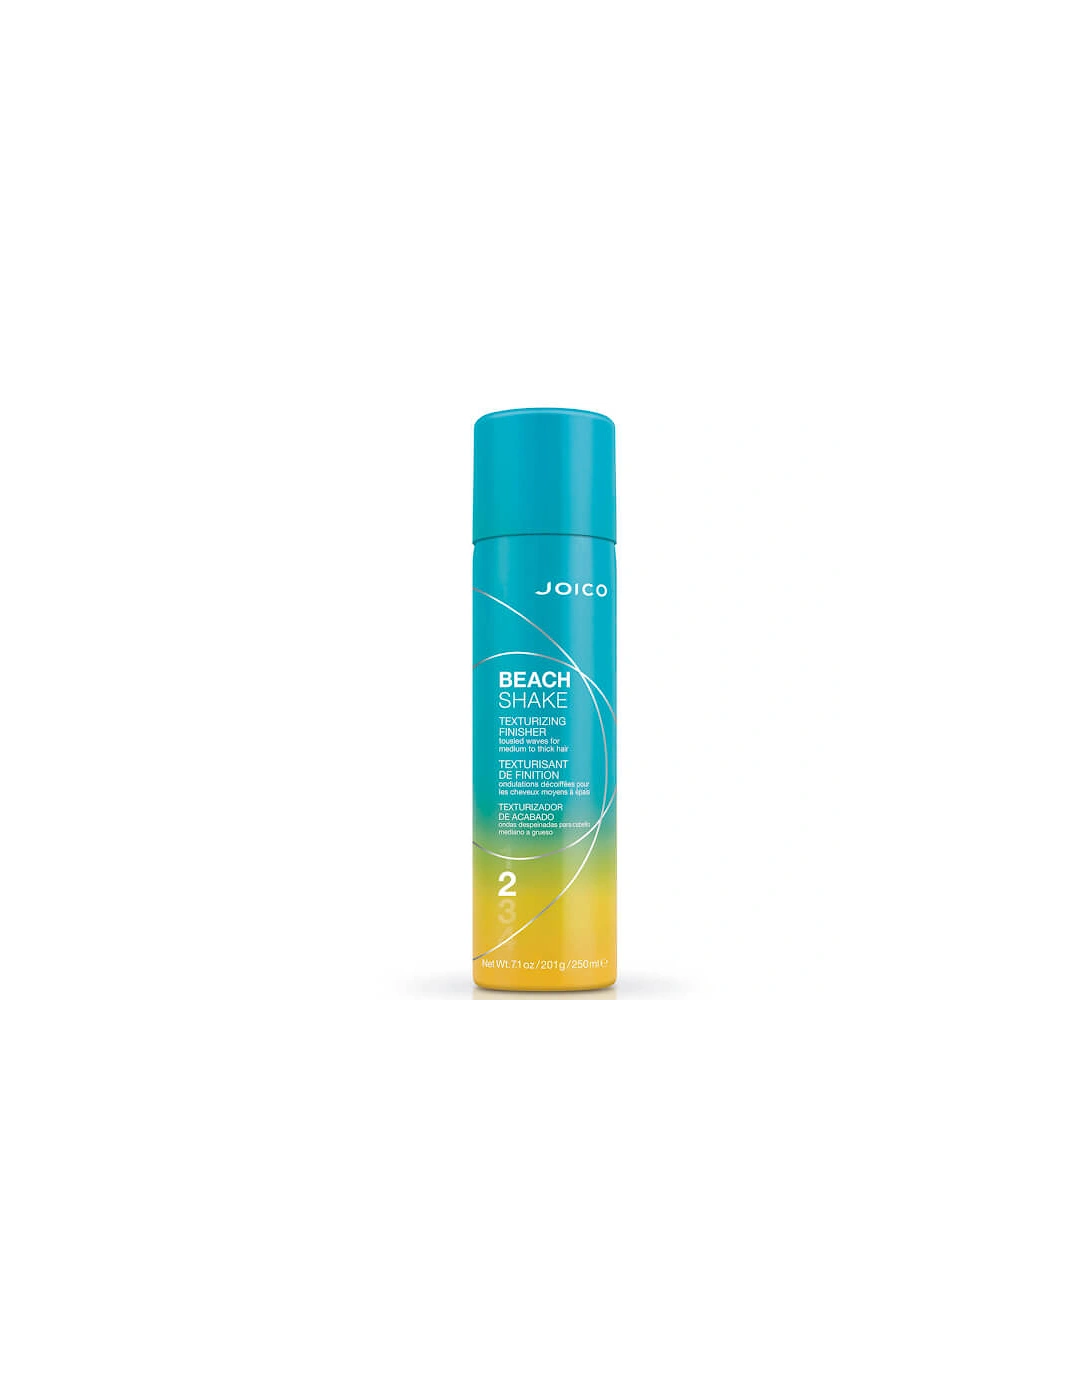 Beach Shake Texturising Finisher Tousled Waves for Medium/Thick Hair 250ml - Joico, 2 of 1